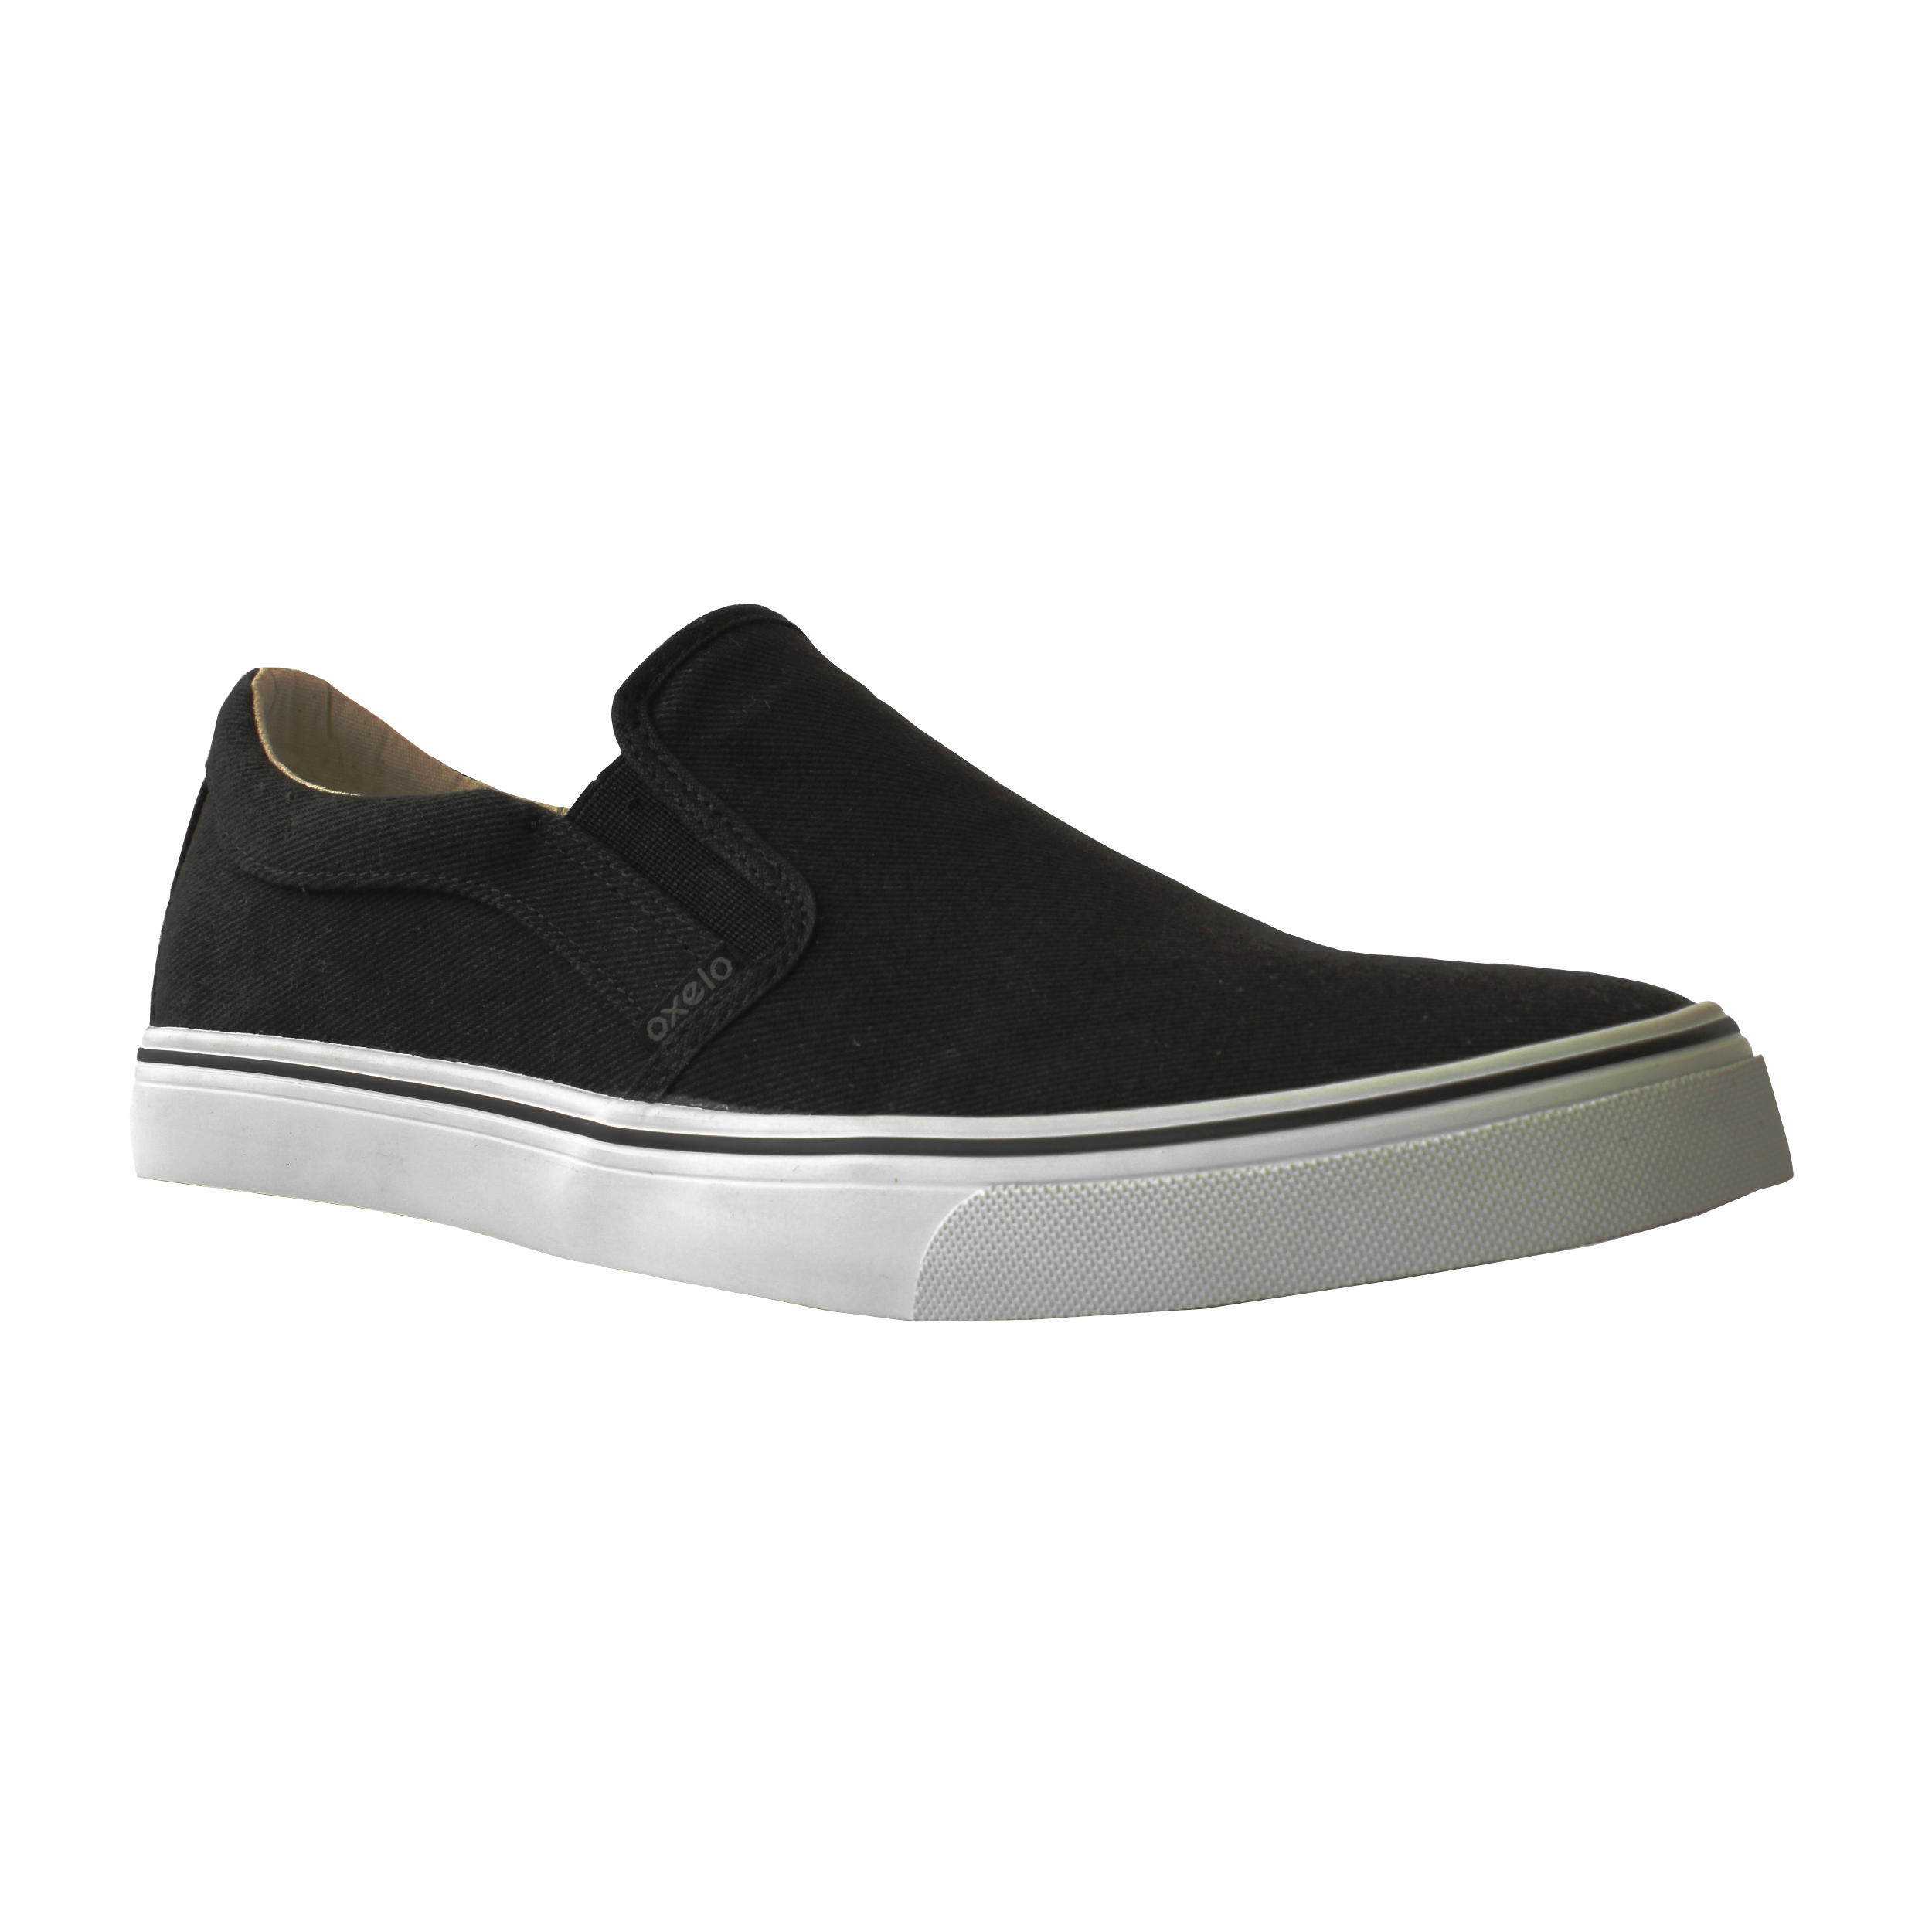 Skate Shoes - Canvas Shoes Buy Online 